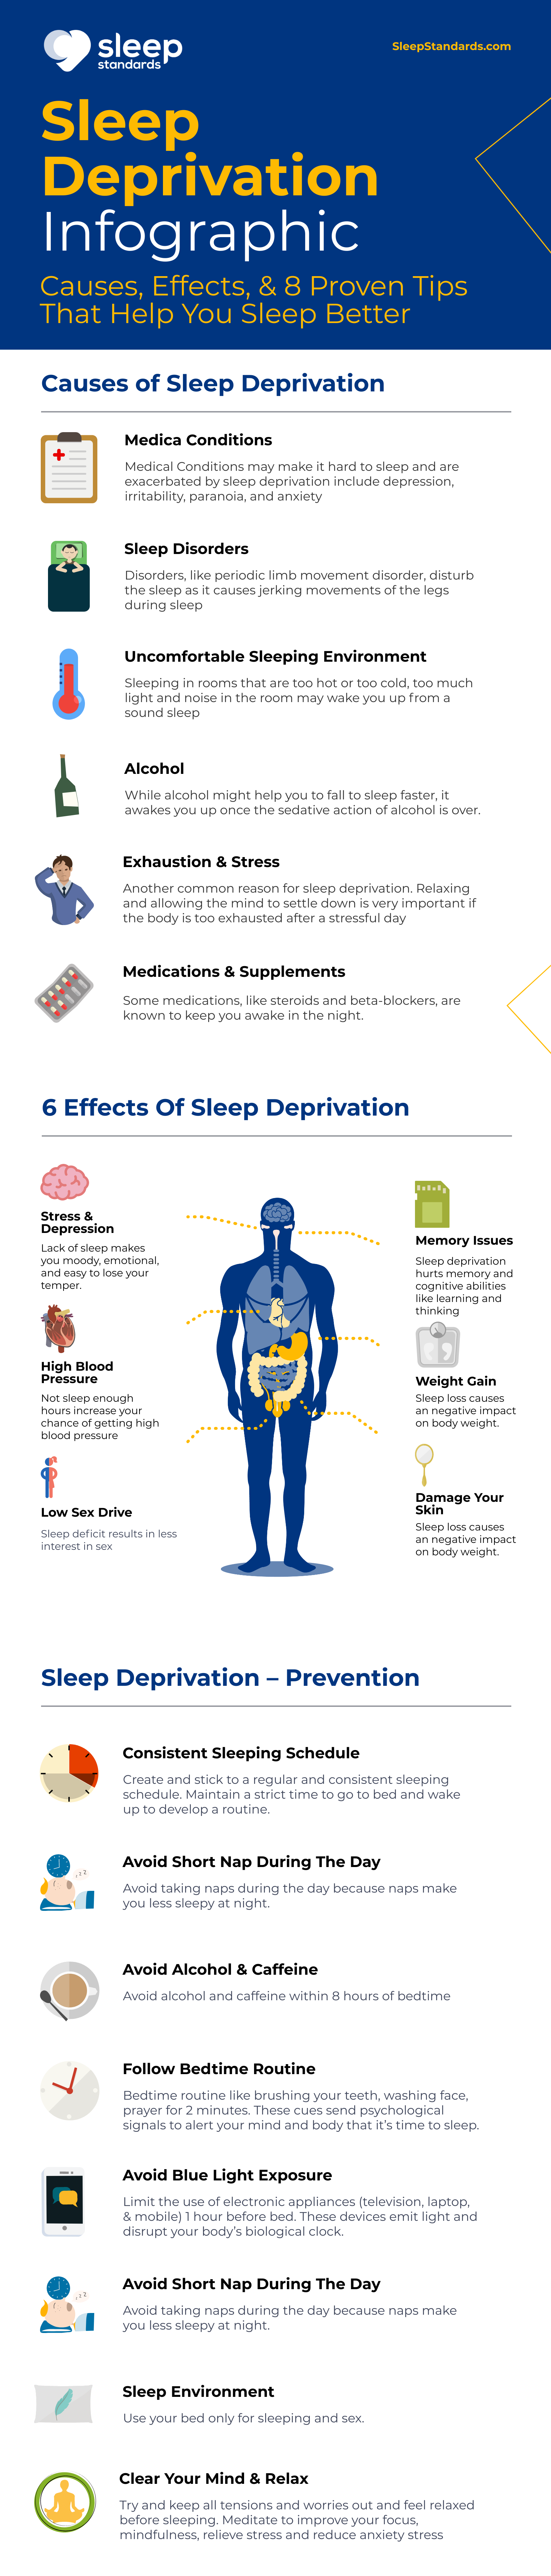 11 Effects of Sleep Deprivation on Your Body